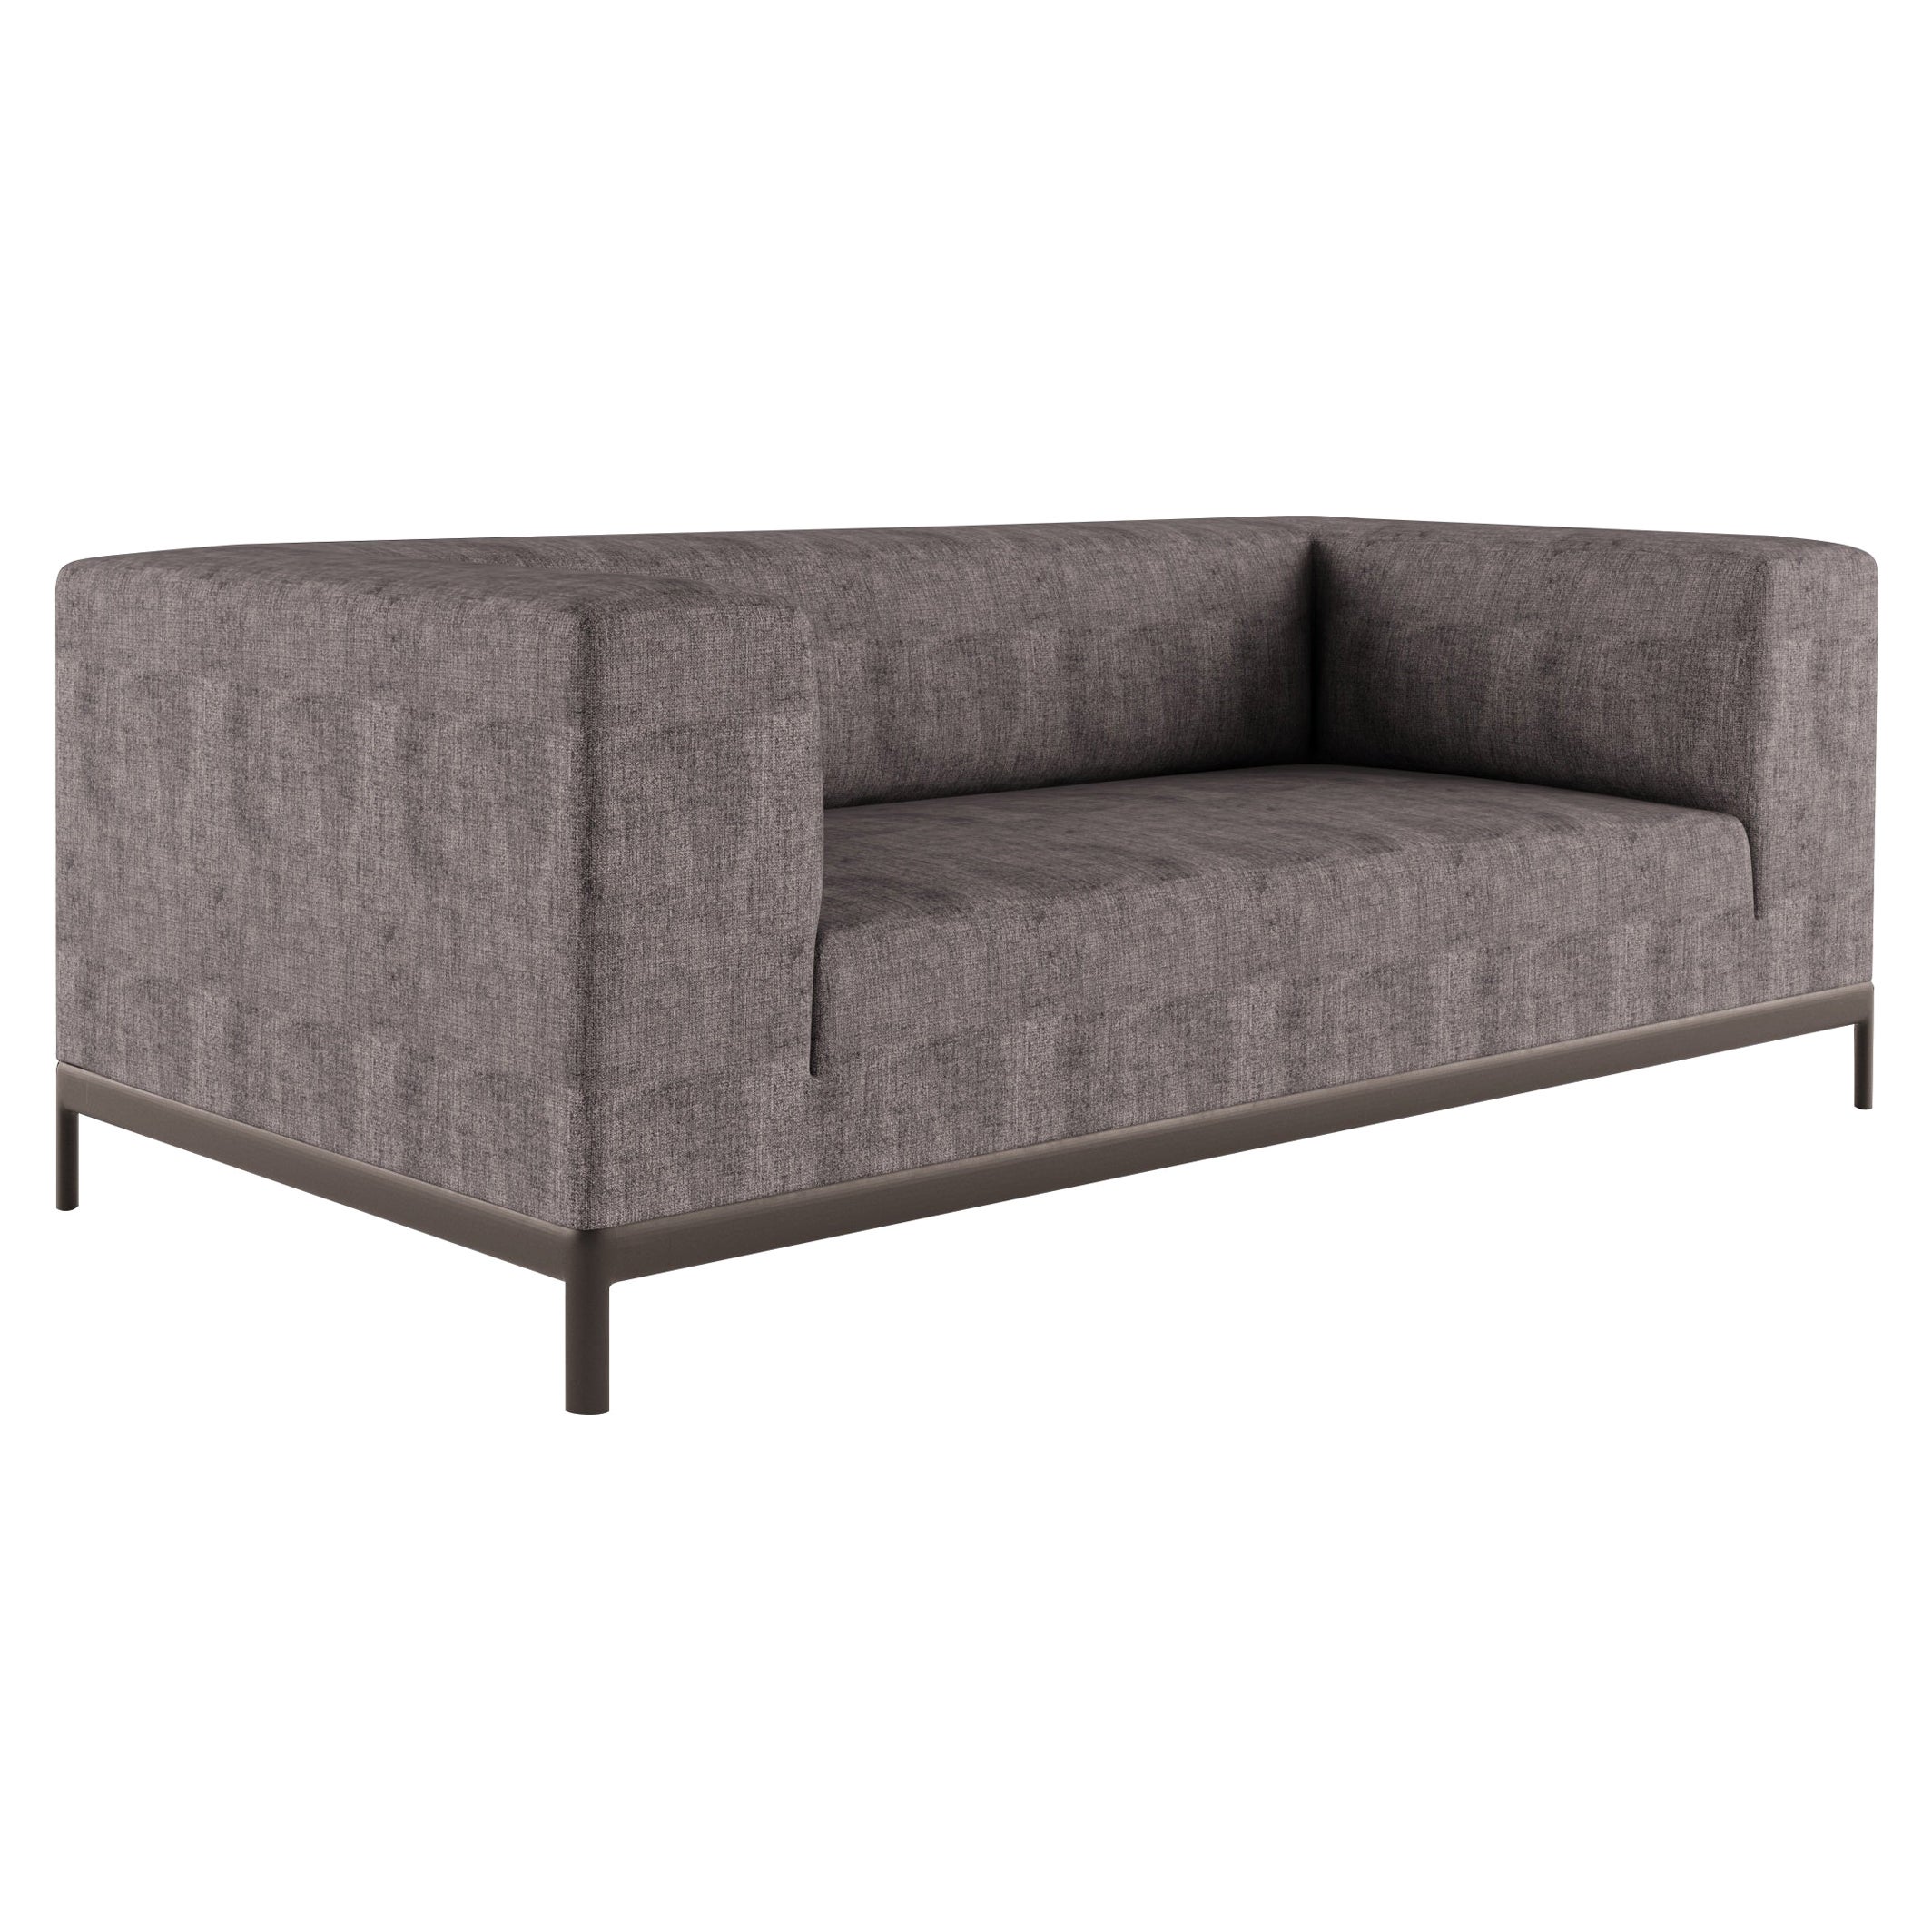 Alias P32 AluZen Soft Sofa 2 Seater with Upholstery and Lacquered Aluminum Frame For Sale